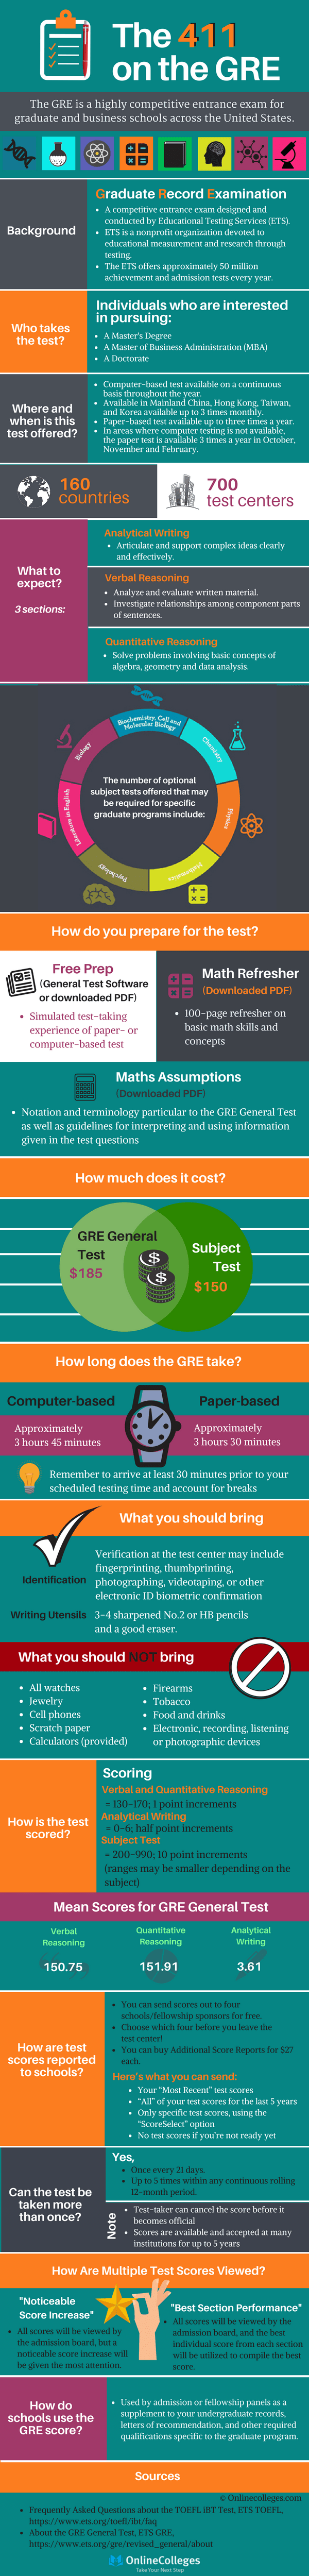 Ultimate-Guide-to-the-GRE-infographic